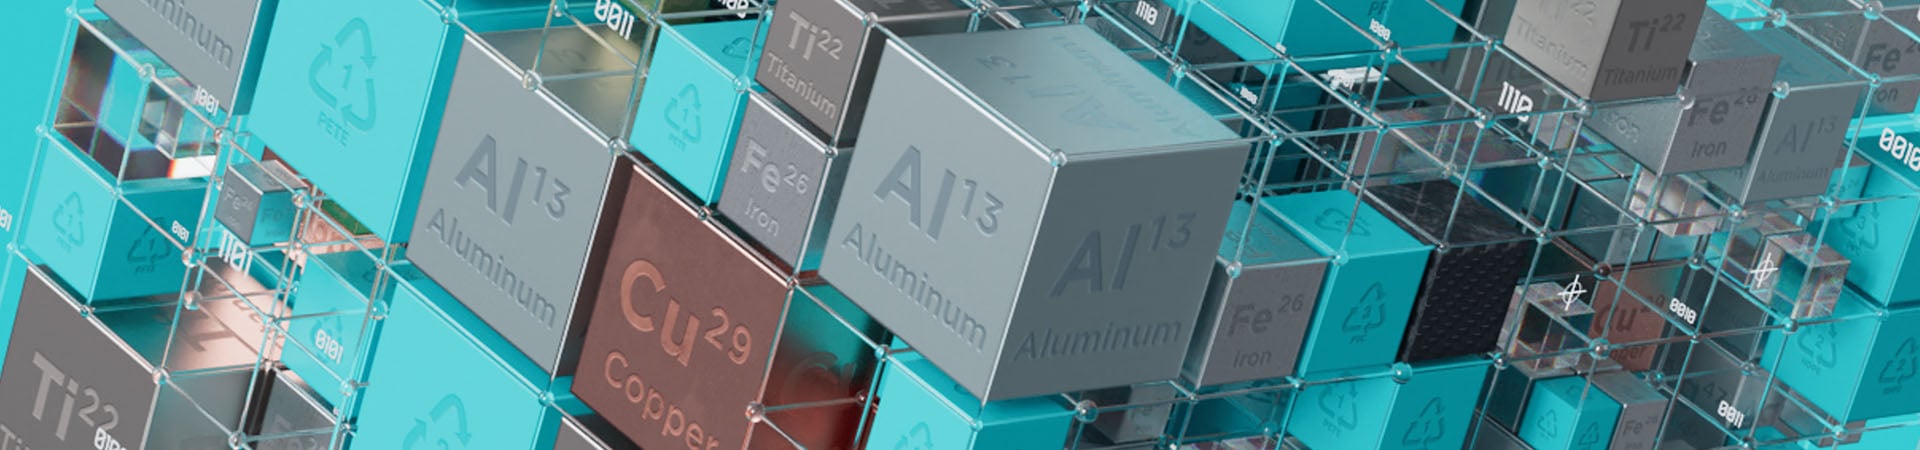 A 3D illustration representing a material data center showing plastic and metal codes within cubes.